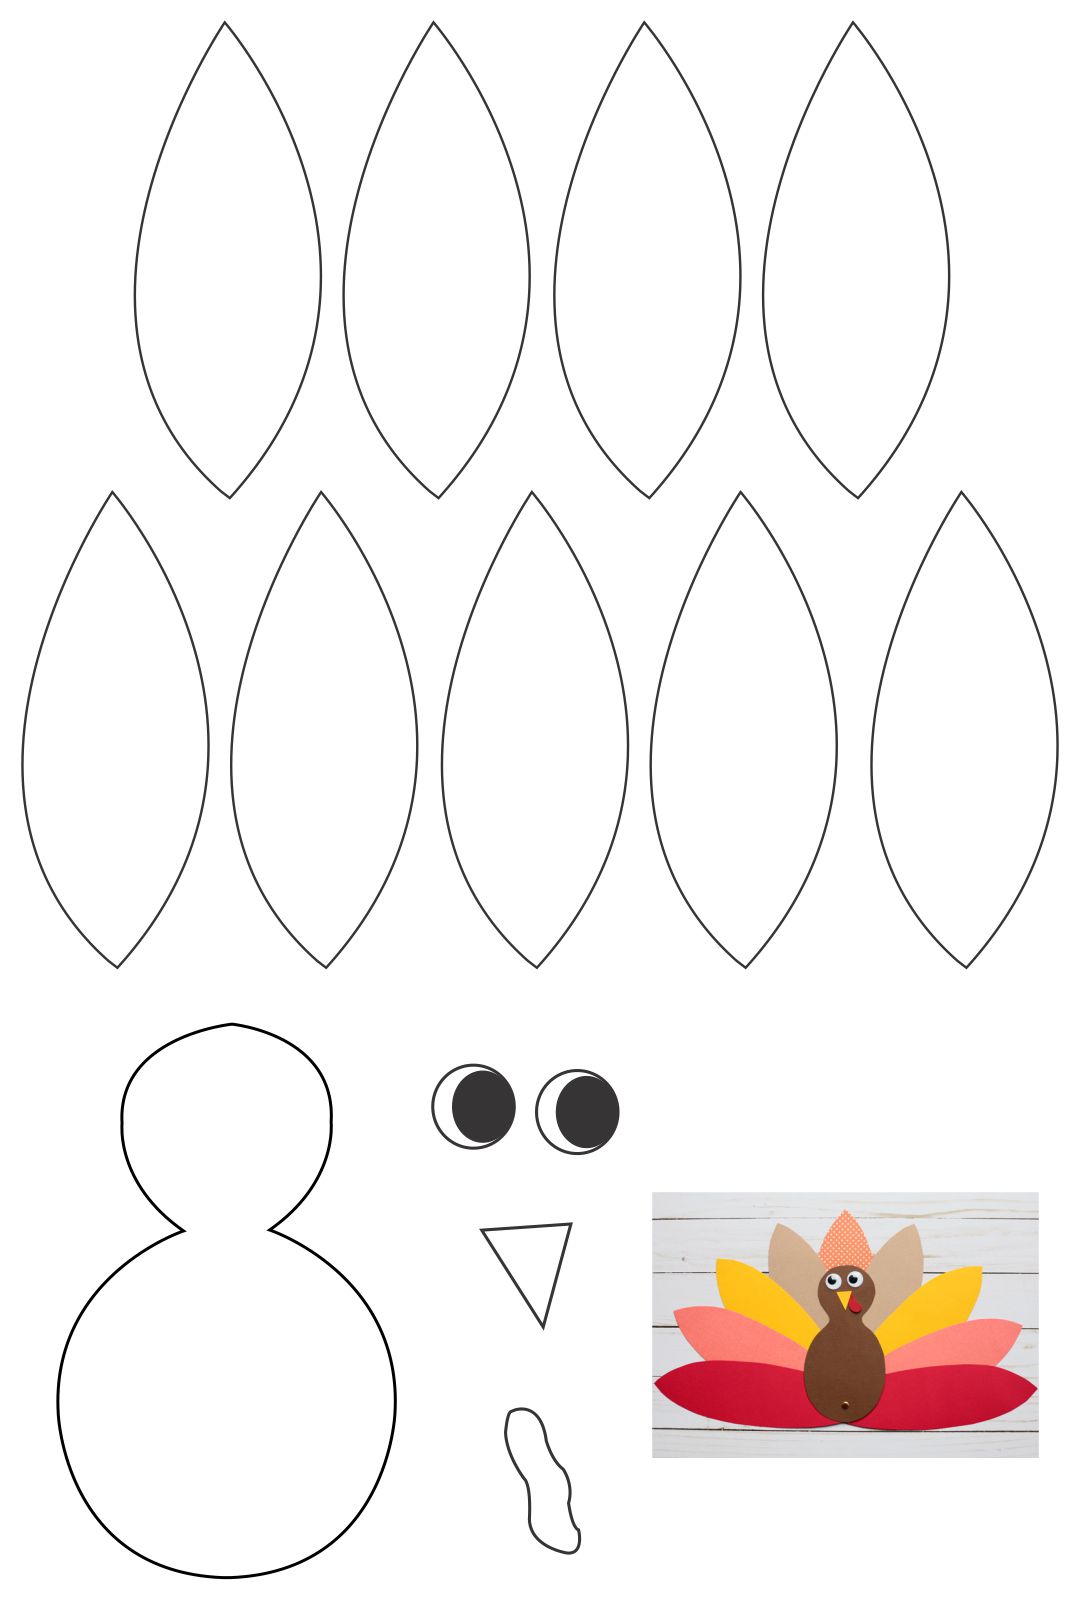 10 Best Thanksgiving Arts And Crafts Printable PDF for Free at Printablee